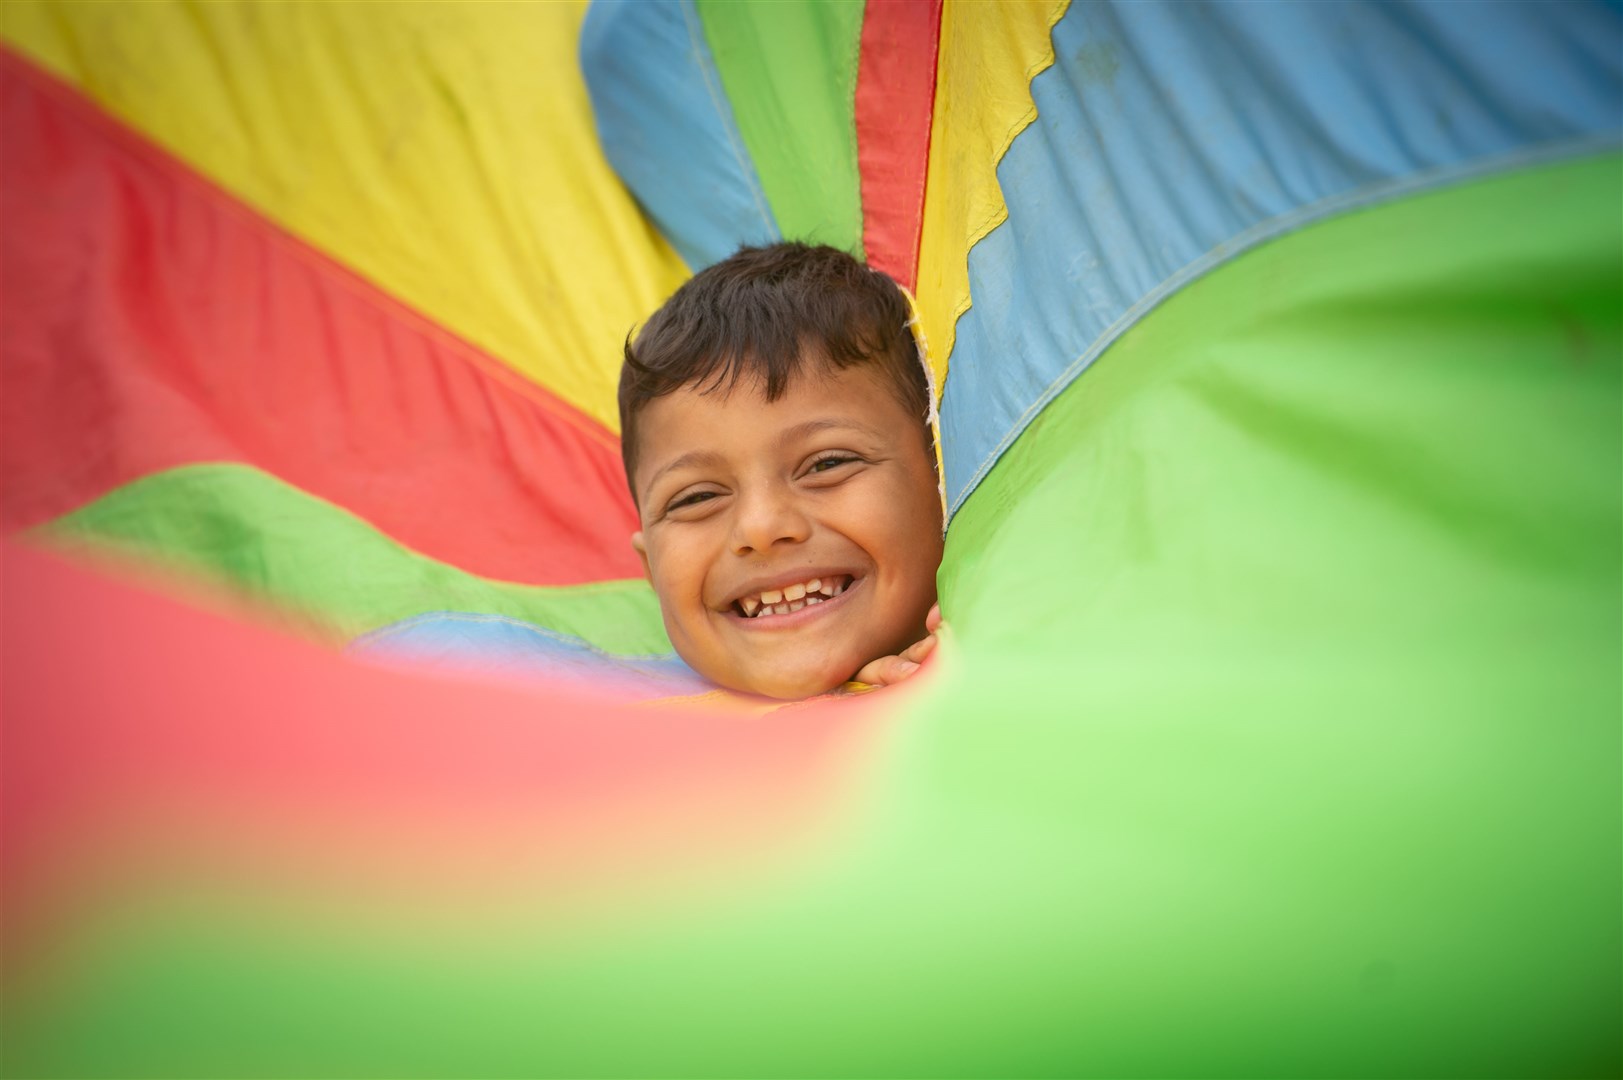 A play scheme at The Field in Alness run by The Place youth group put smiles on many faces – amongst them Omar Ali. Picture: Callum Mackay